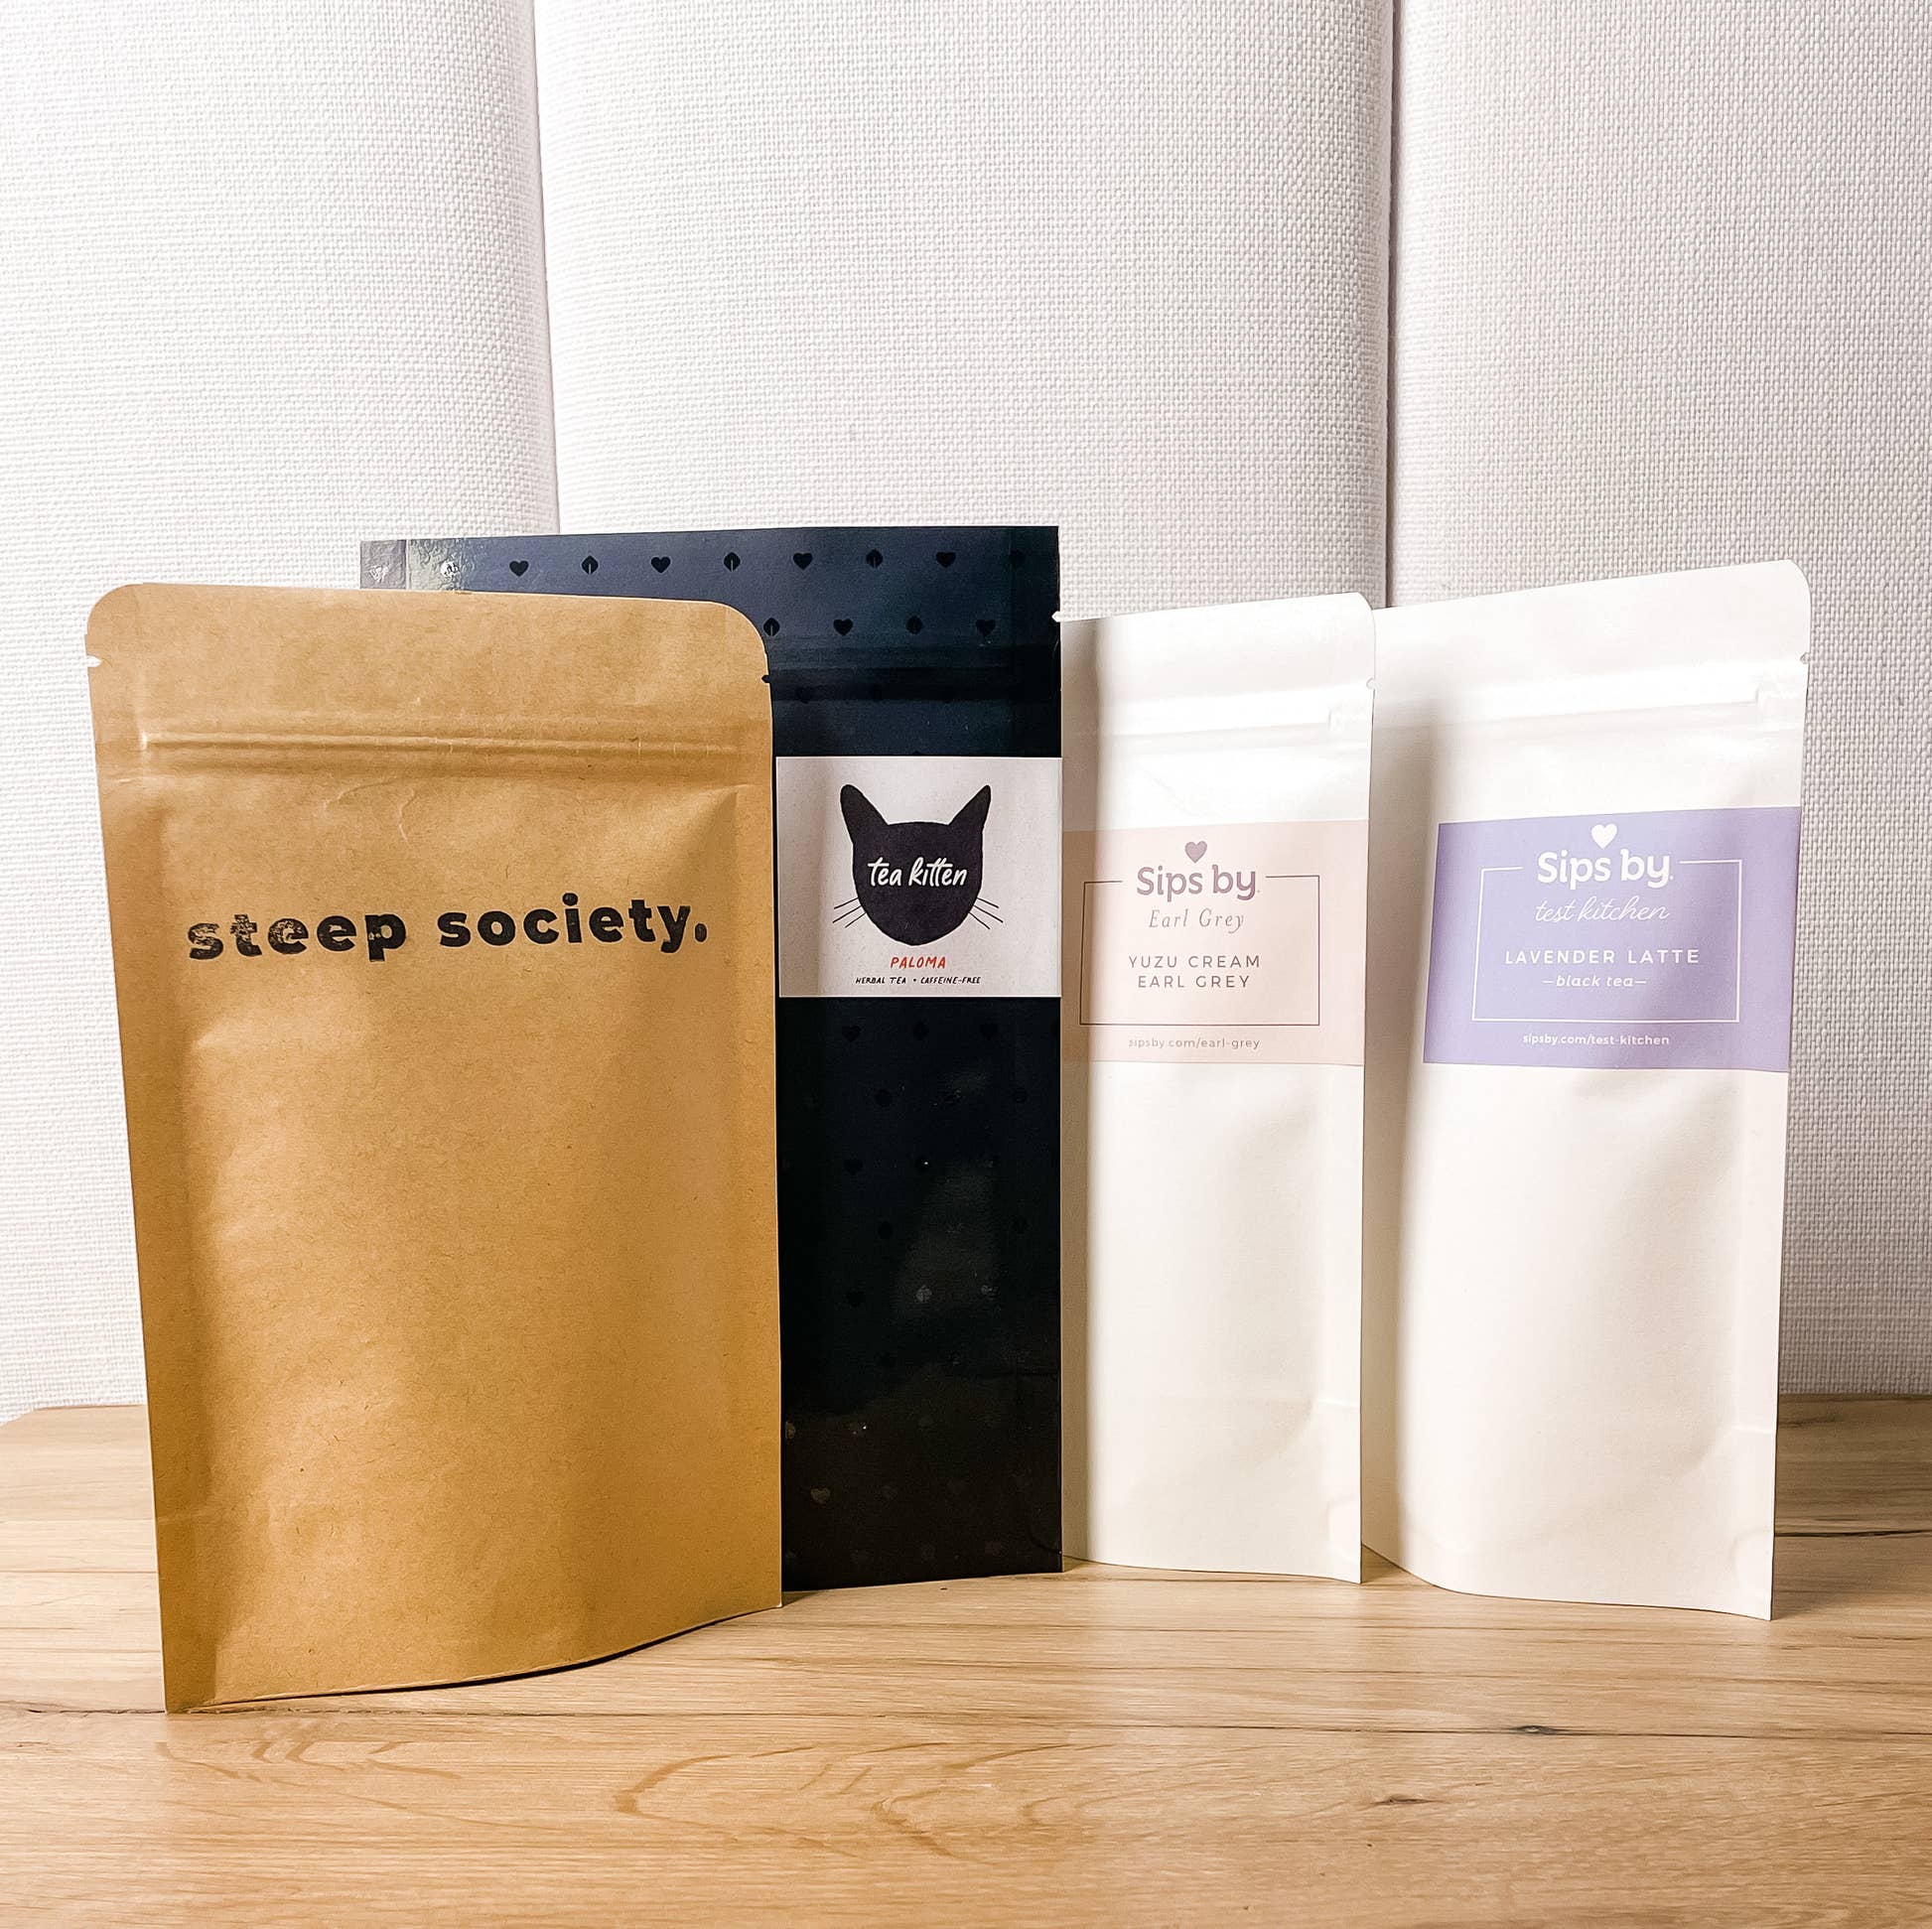 Brunch Tea Collection full-sized loose leaf tea pouches by Steep Society, Tea Kitten, Sips by Earl Grey, and Sips by Test Kitchen